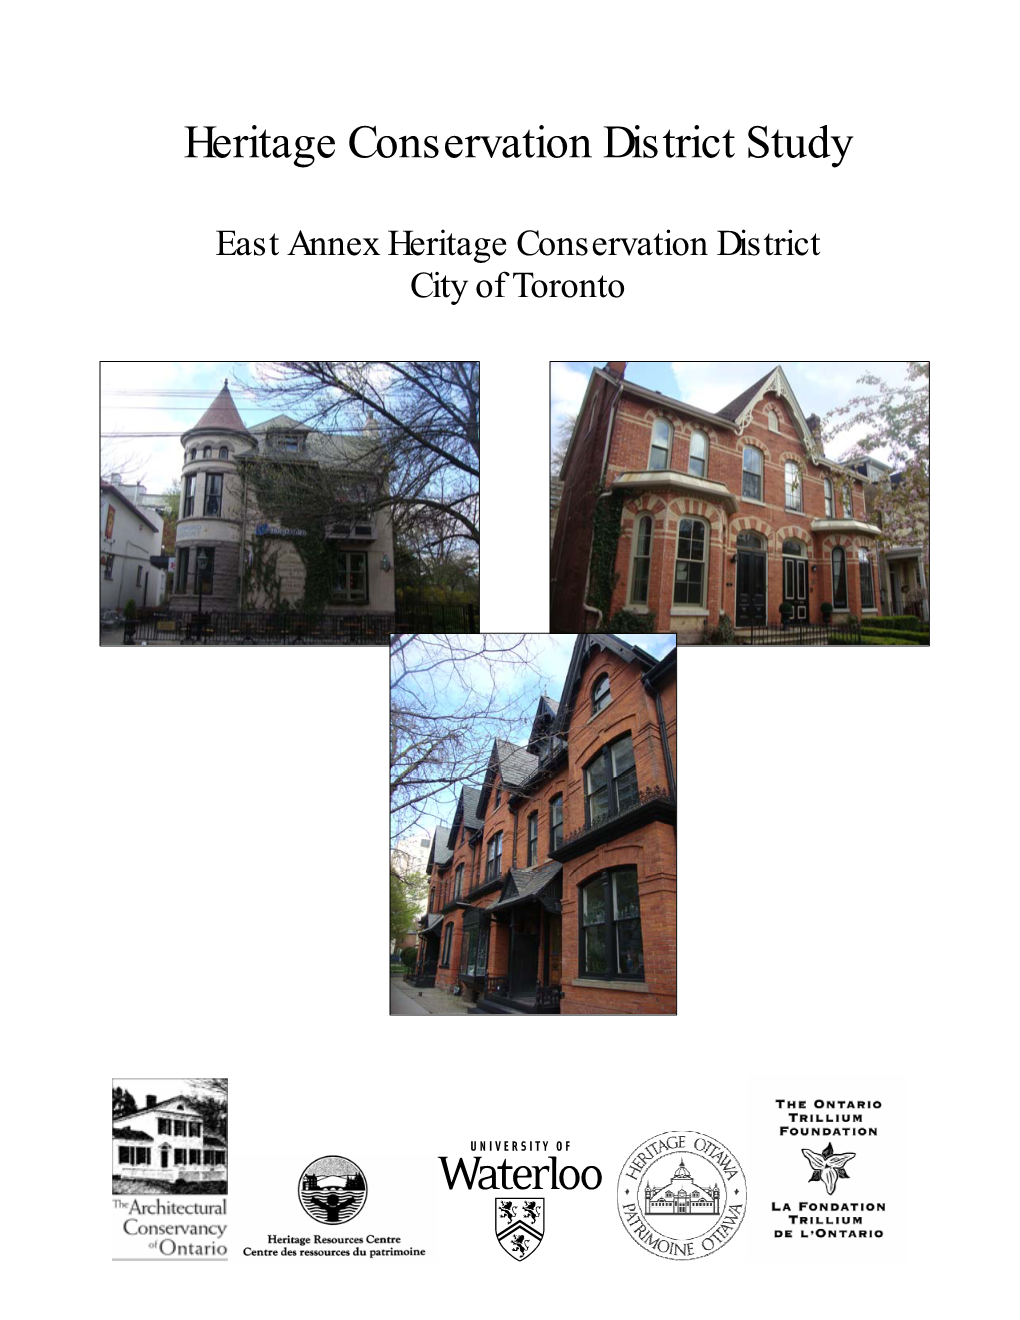 East Annex Heritage Conservation District City of Toronto